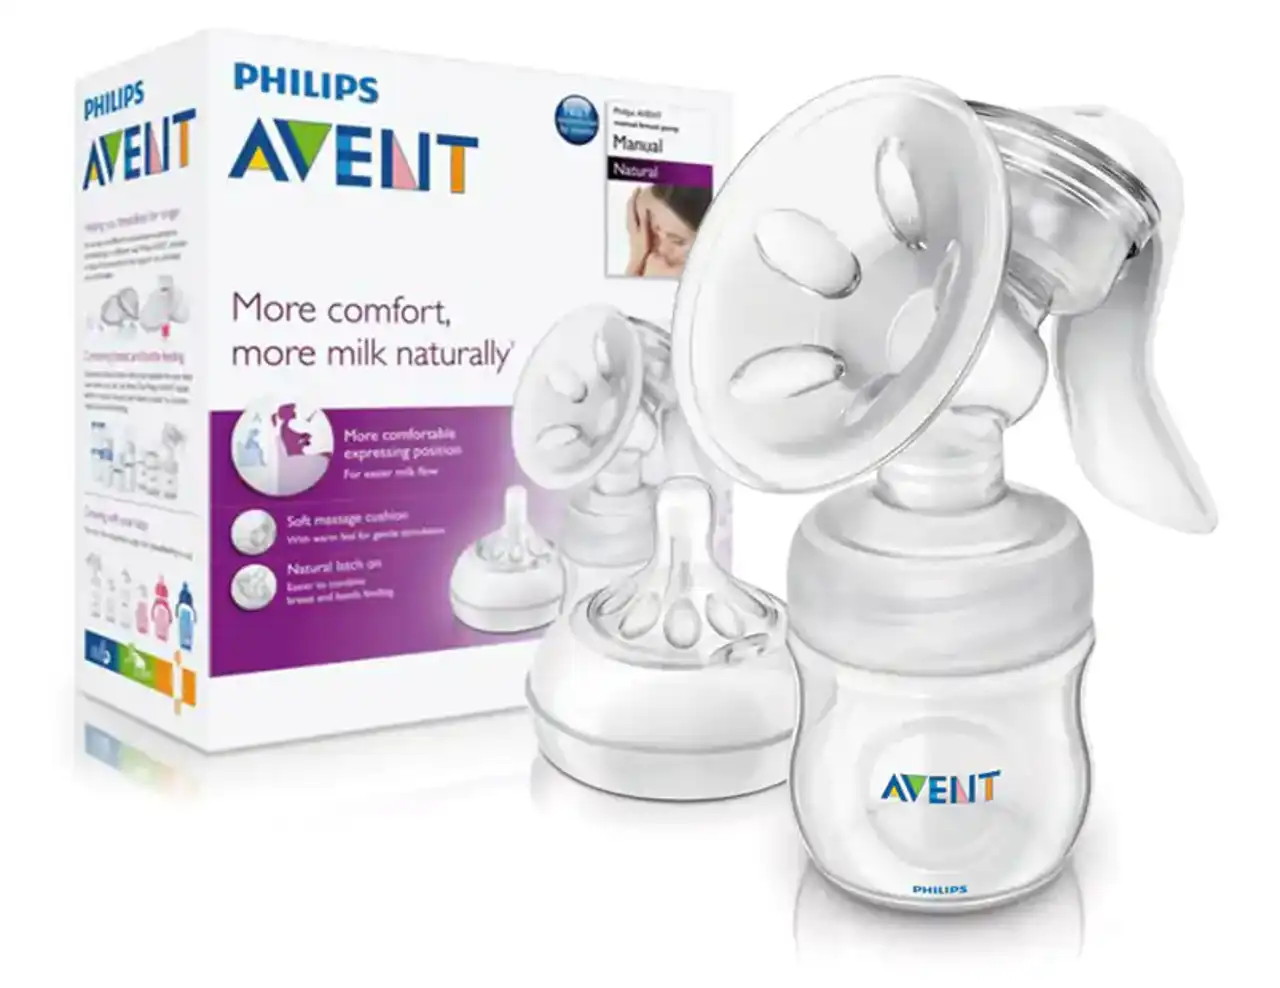 avent-breastpump-versatility-and-portability-versatile-and-portable-the-avent-breastpump-health-personal-care-baby-care-uniqsource-com